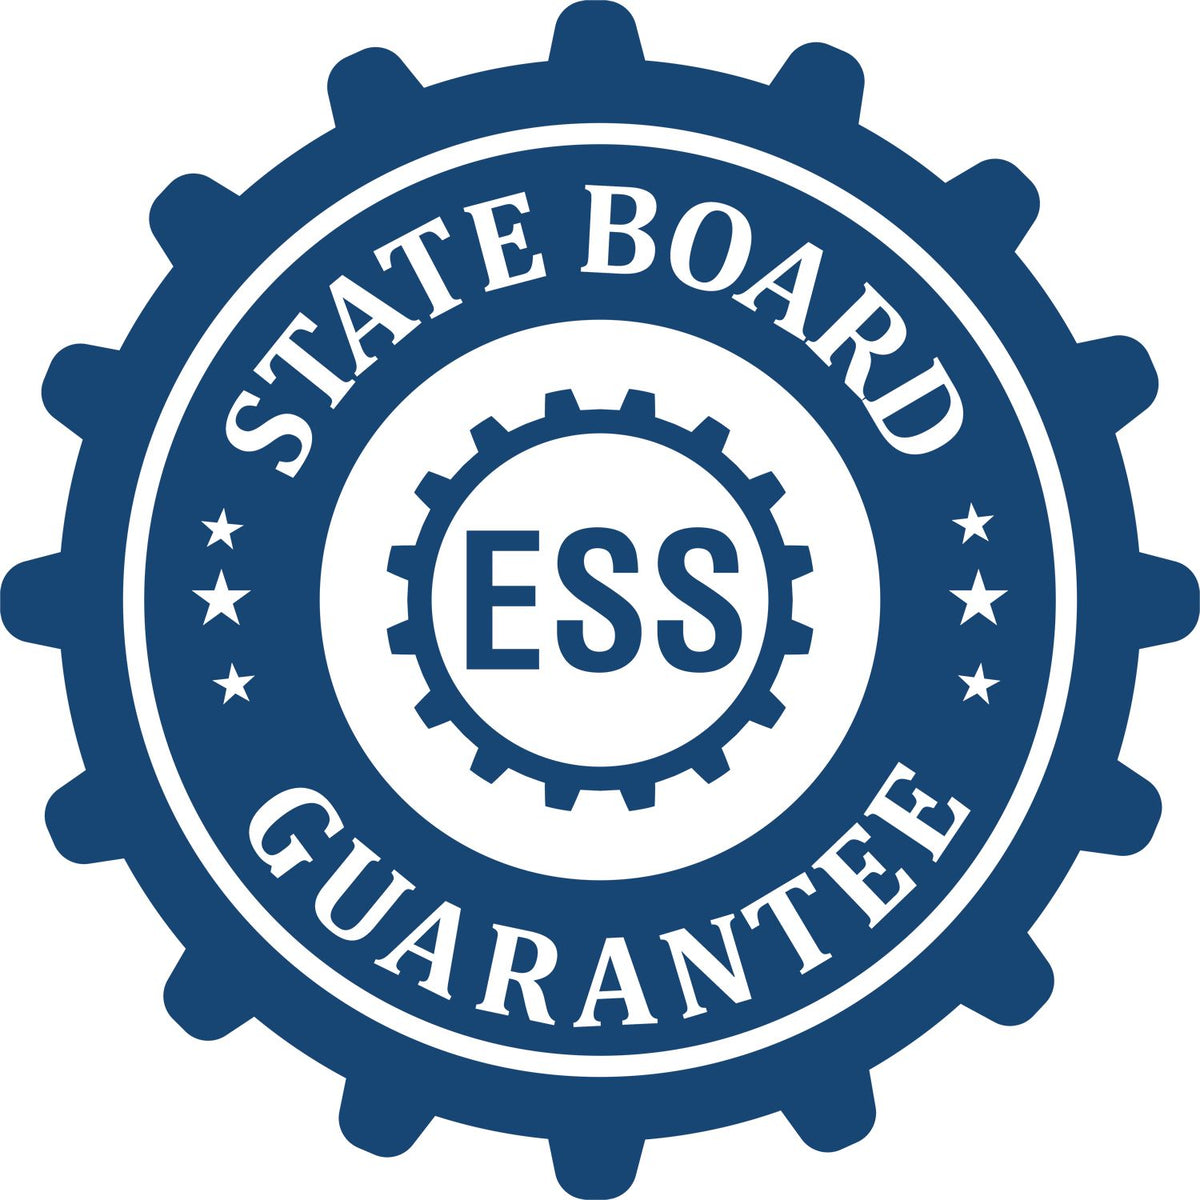 An emblem in a gear shape illustrating a state board guarantee for the Gift Delaware Engineer Seal